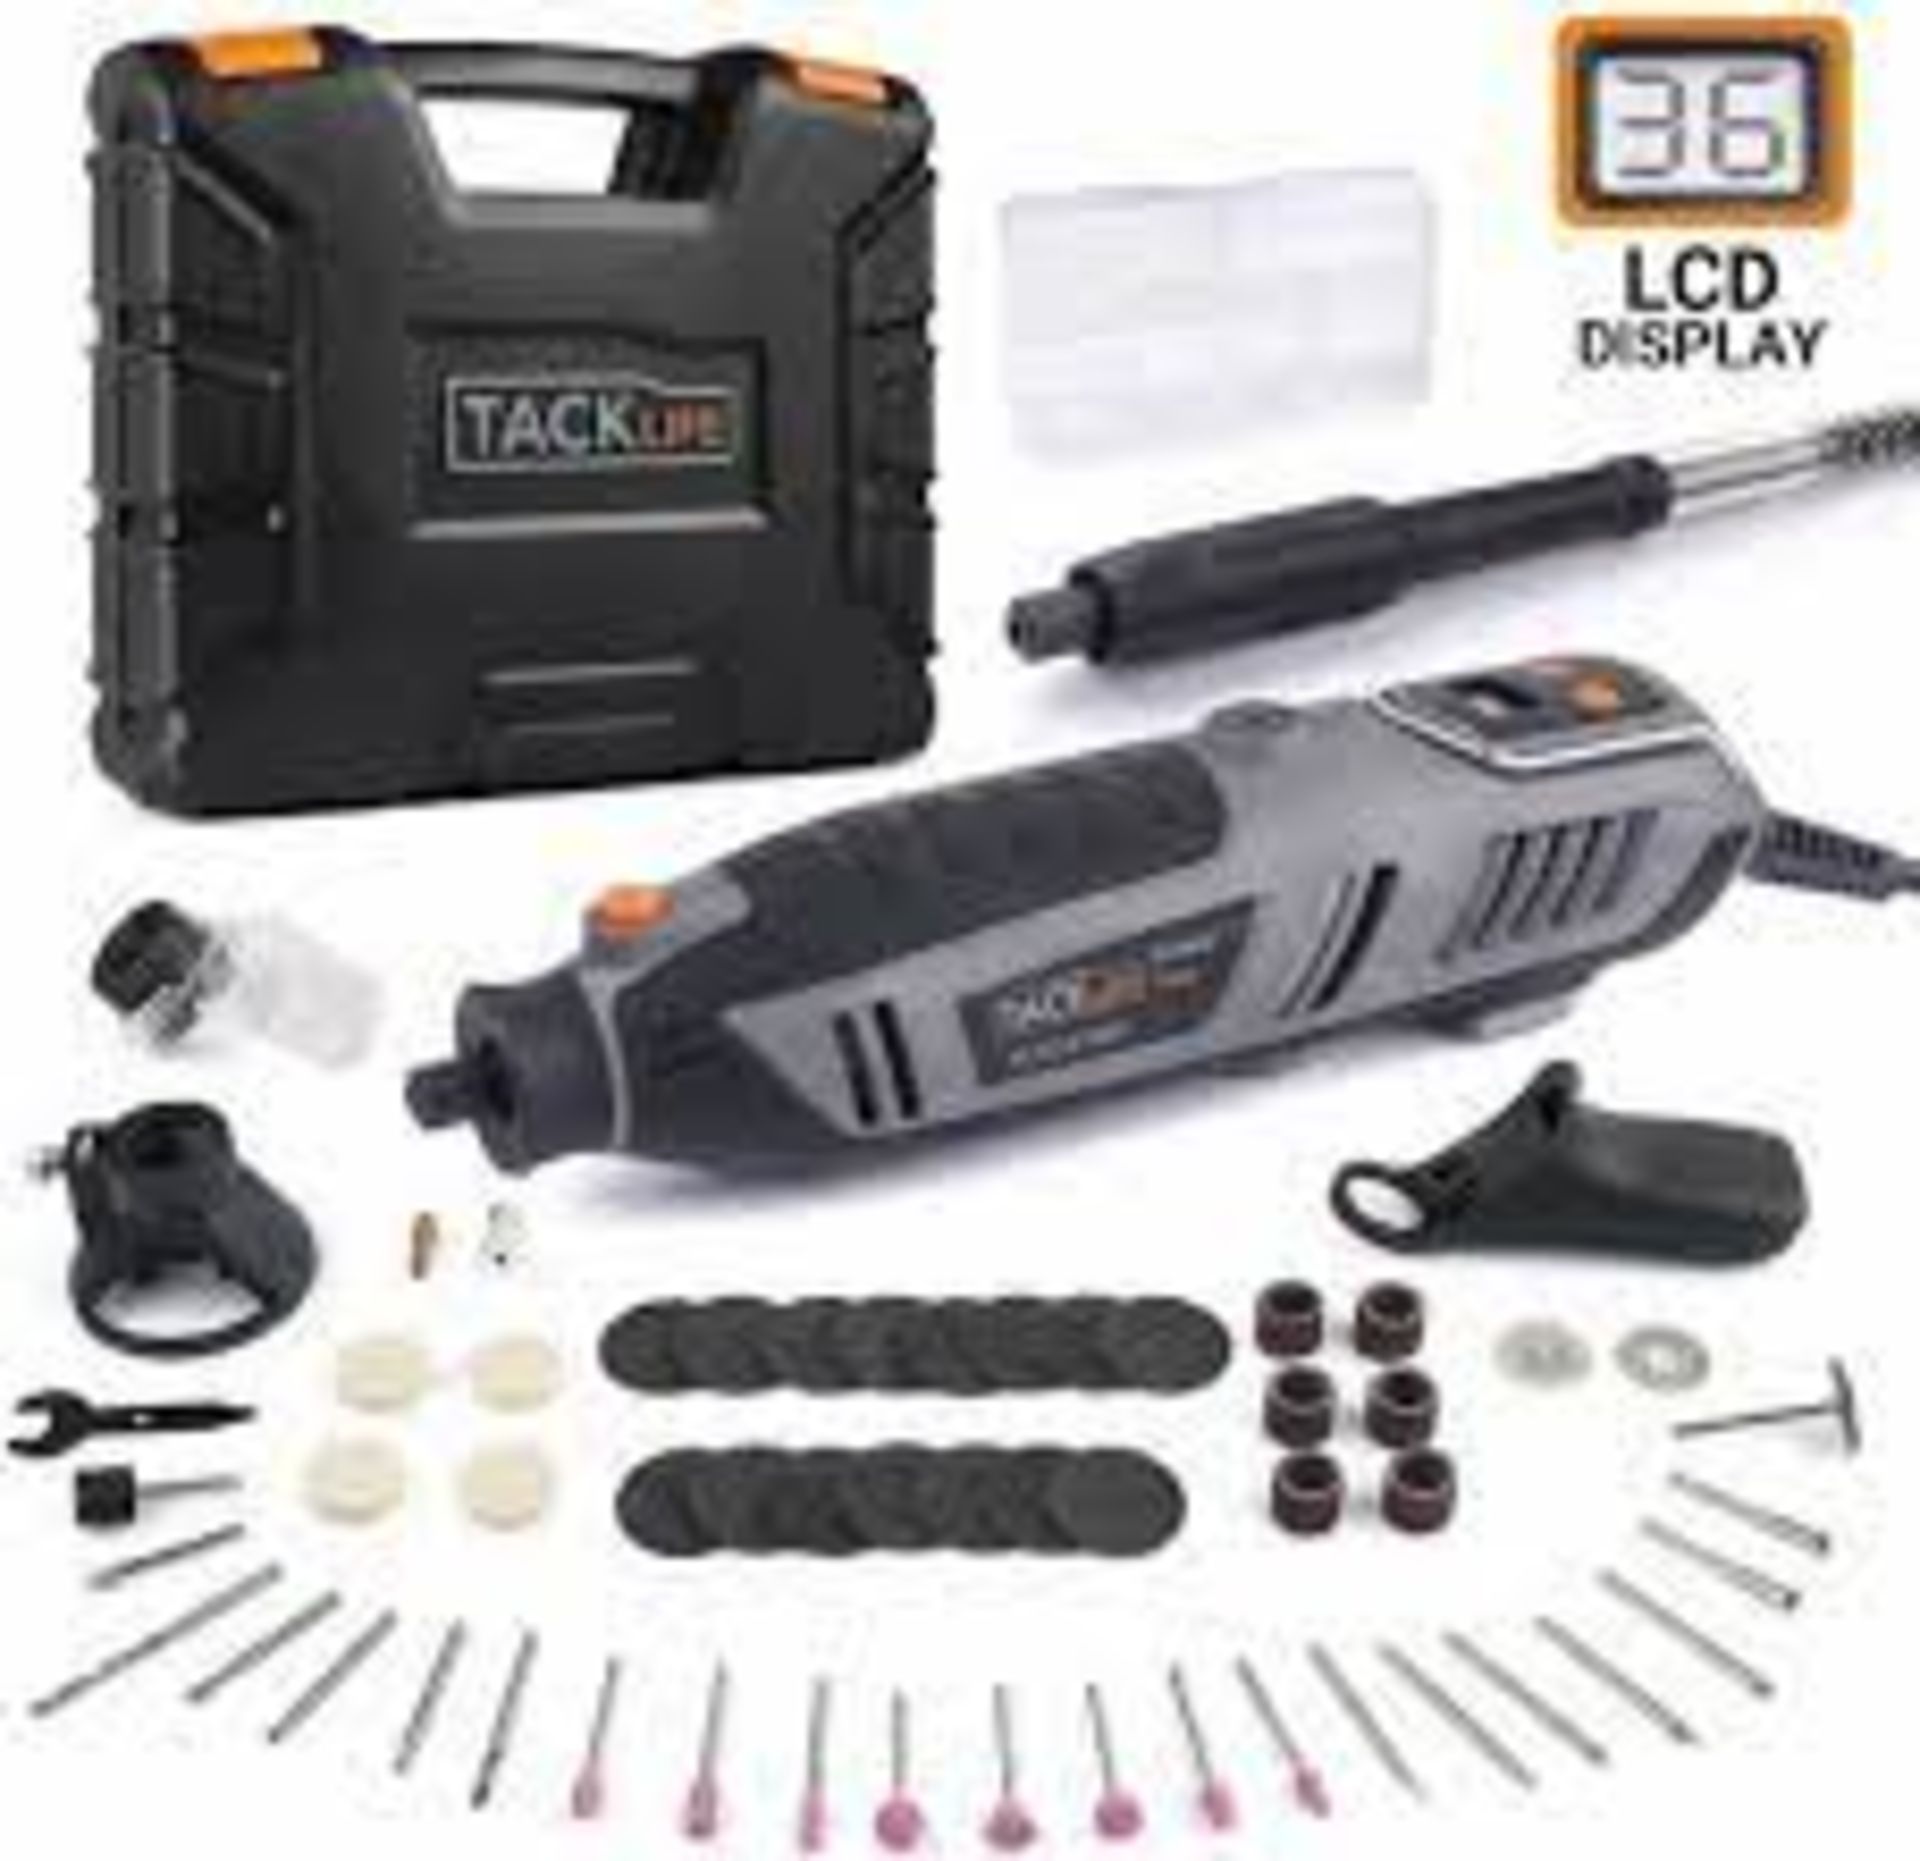 2 X NEW BOXED Tacklife RTD37AC Rotary Tool 200w LCD Display, Grey (RTD34AC-ROW6) PRODUCT DESCRIPTION